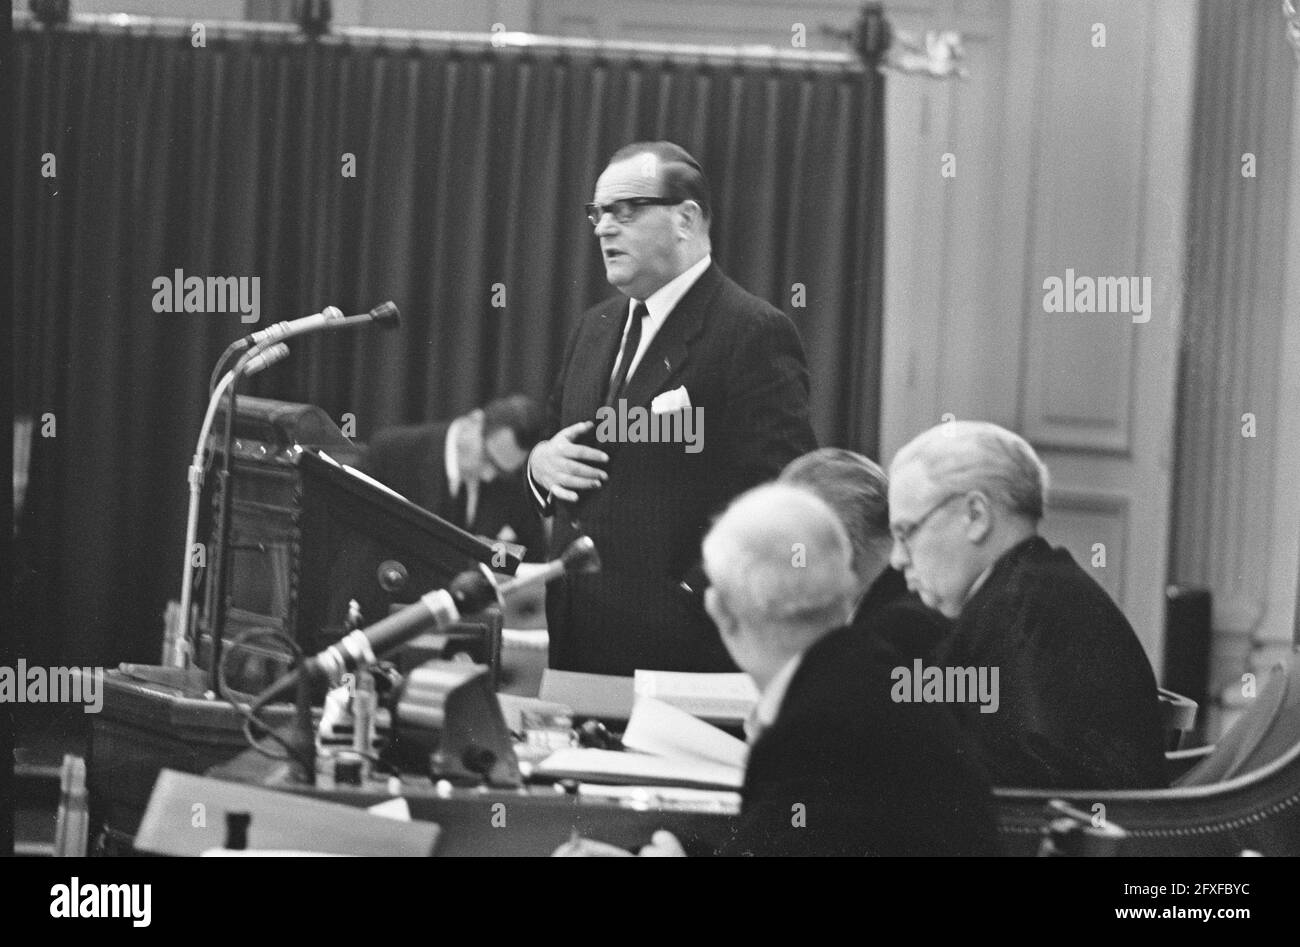 Lower House, Foreign Affairs budget, Mr. Blaisse speaking, 2 February 1965, Budgets, The Netherlands, 20th century press agency photo, news to remember, documentary, historic photography 1945-1990, visual stories, human history of the Twentieth Century, capturing moments in time Stock Photo